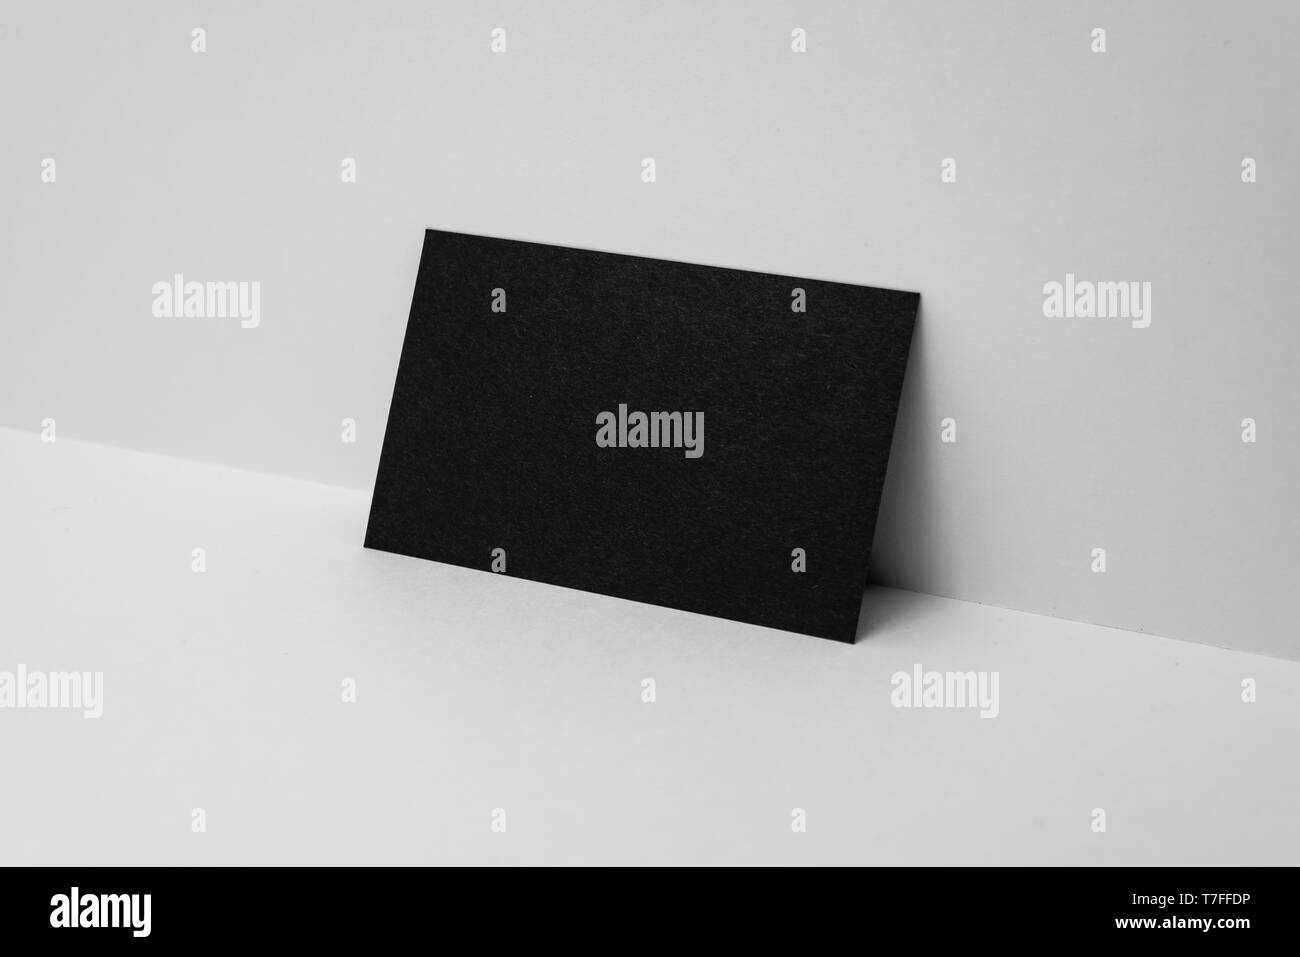 Design concept - perspective view of horizontal black business card on white 3D space background for mockup, it's real photo, not 3D render Stock Photo